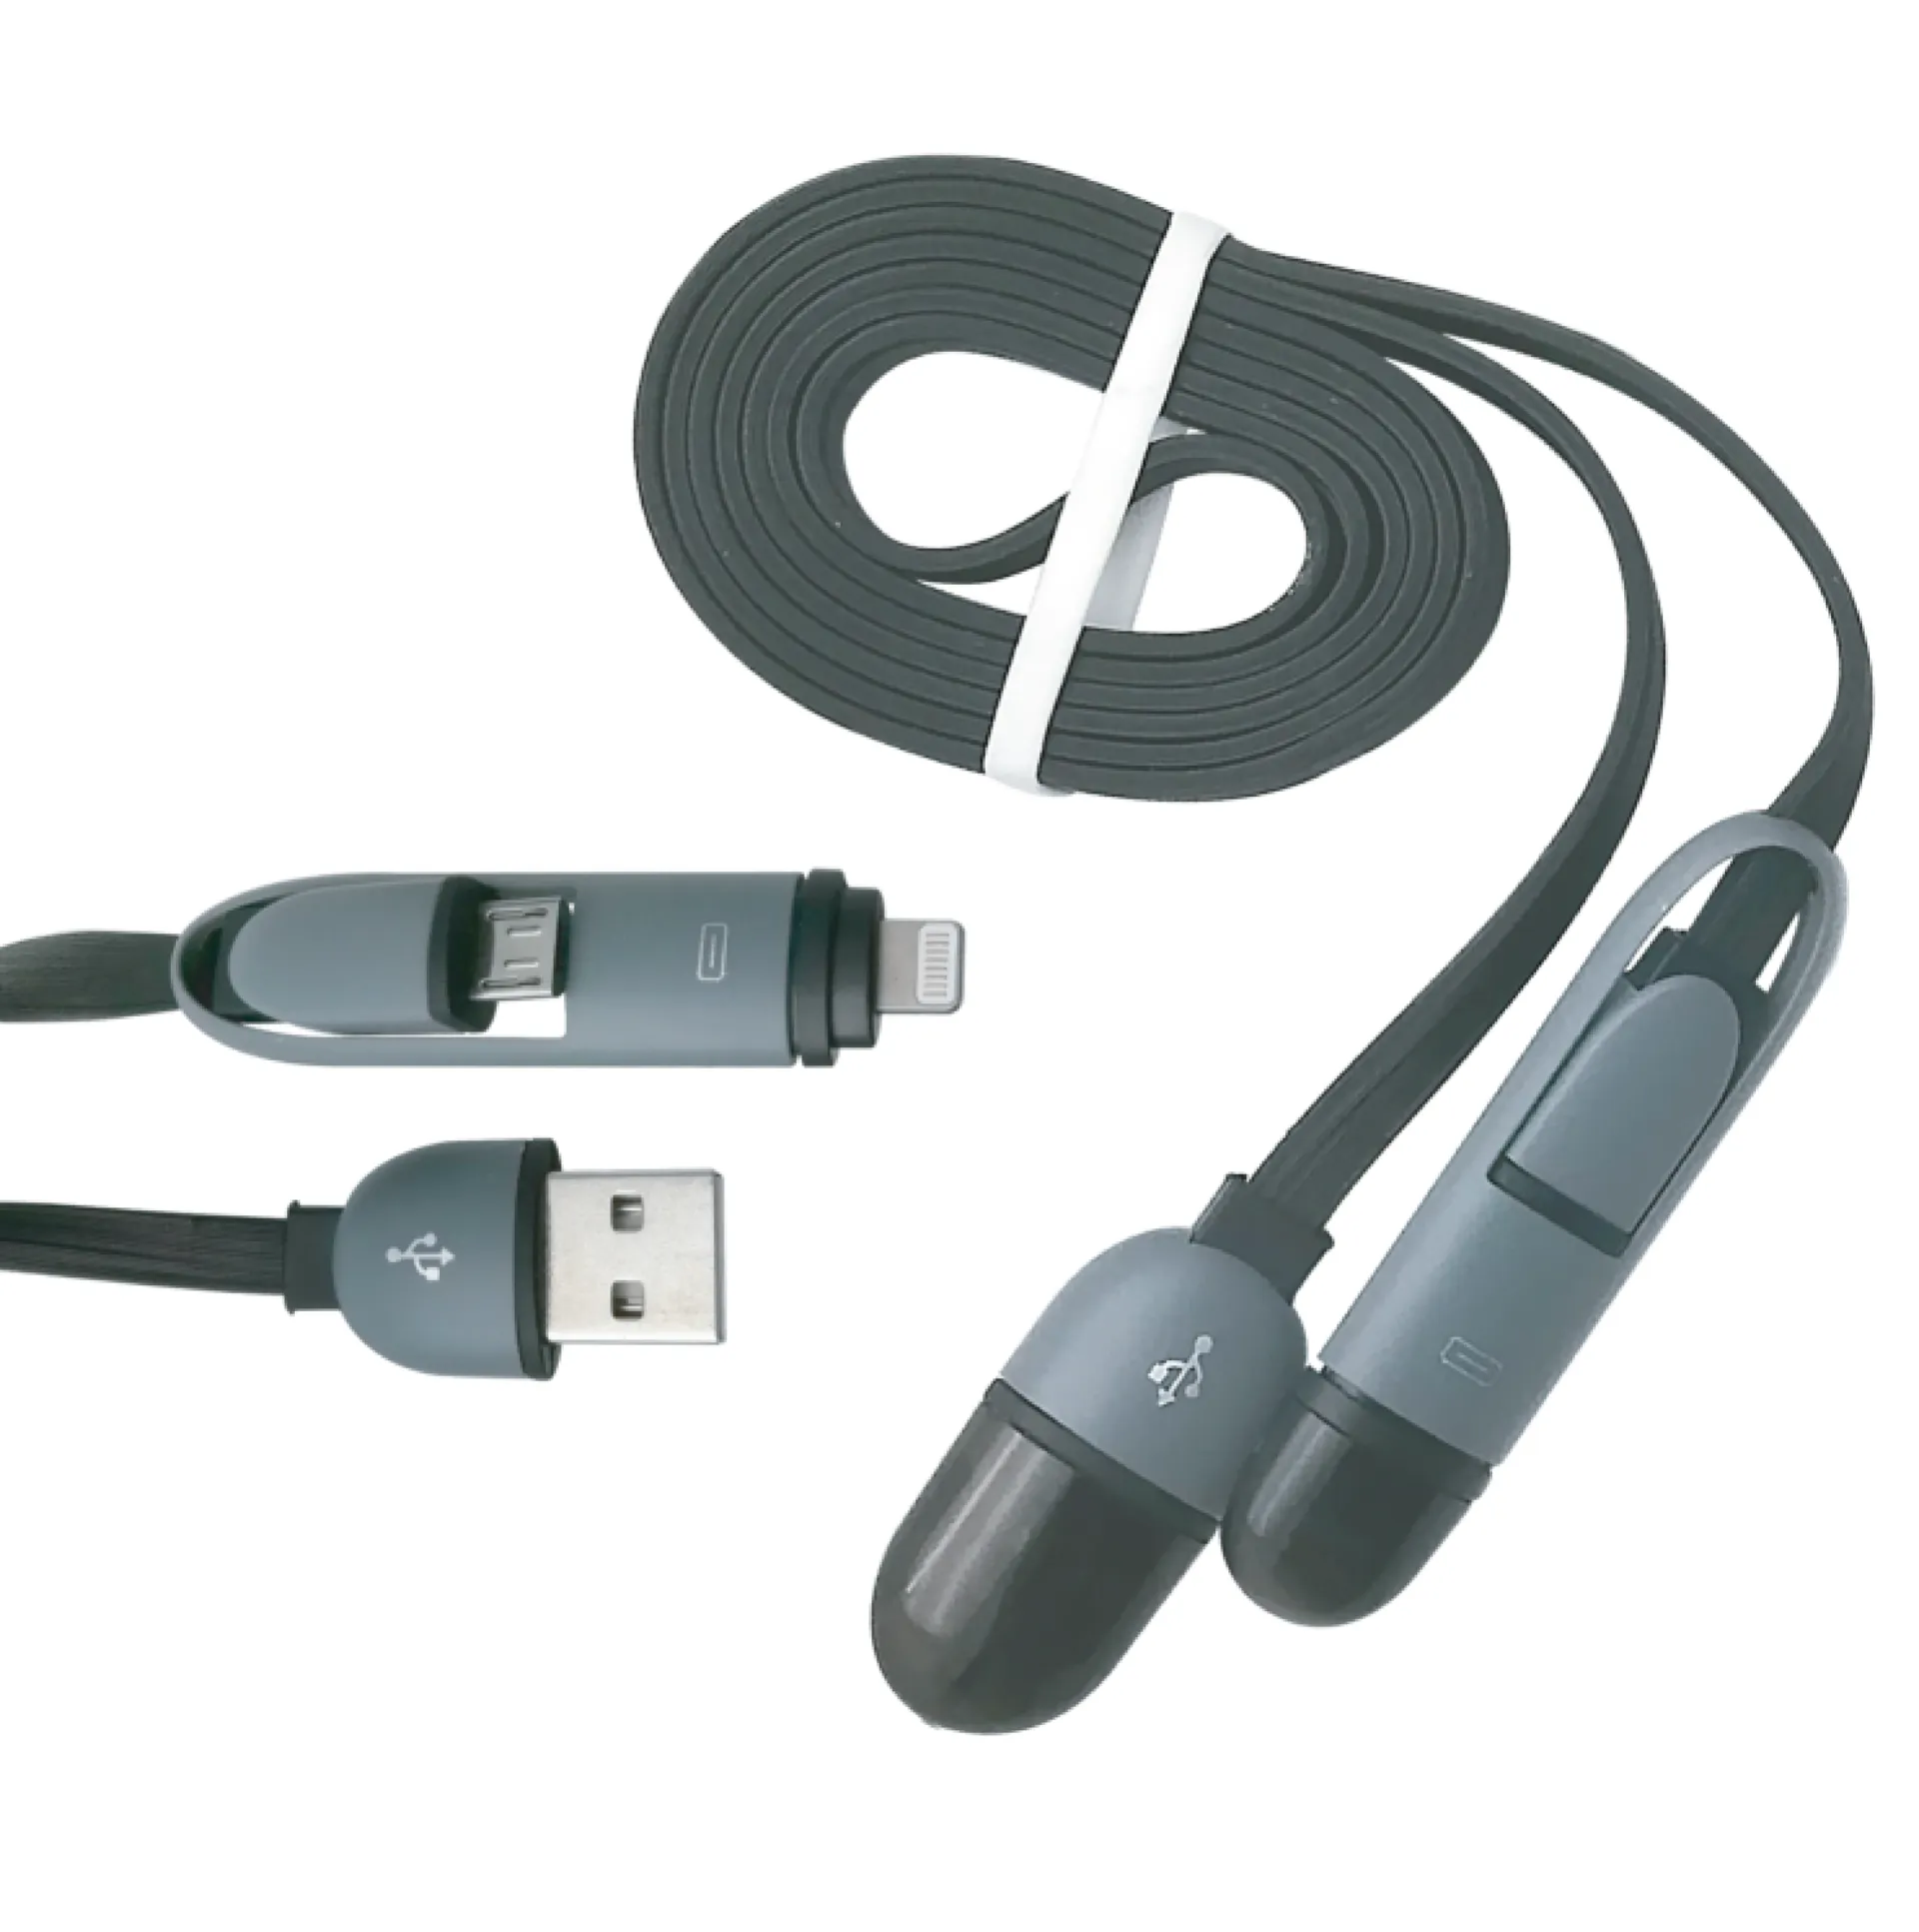 2 in 1 USB Connector Charger Cable